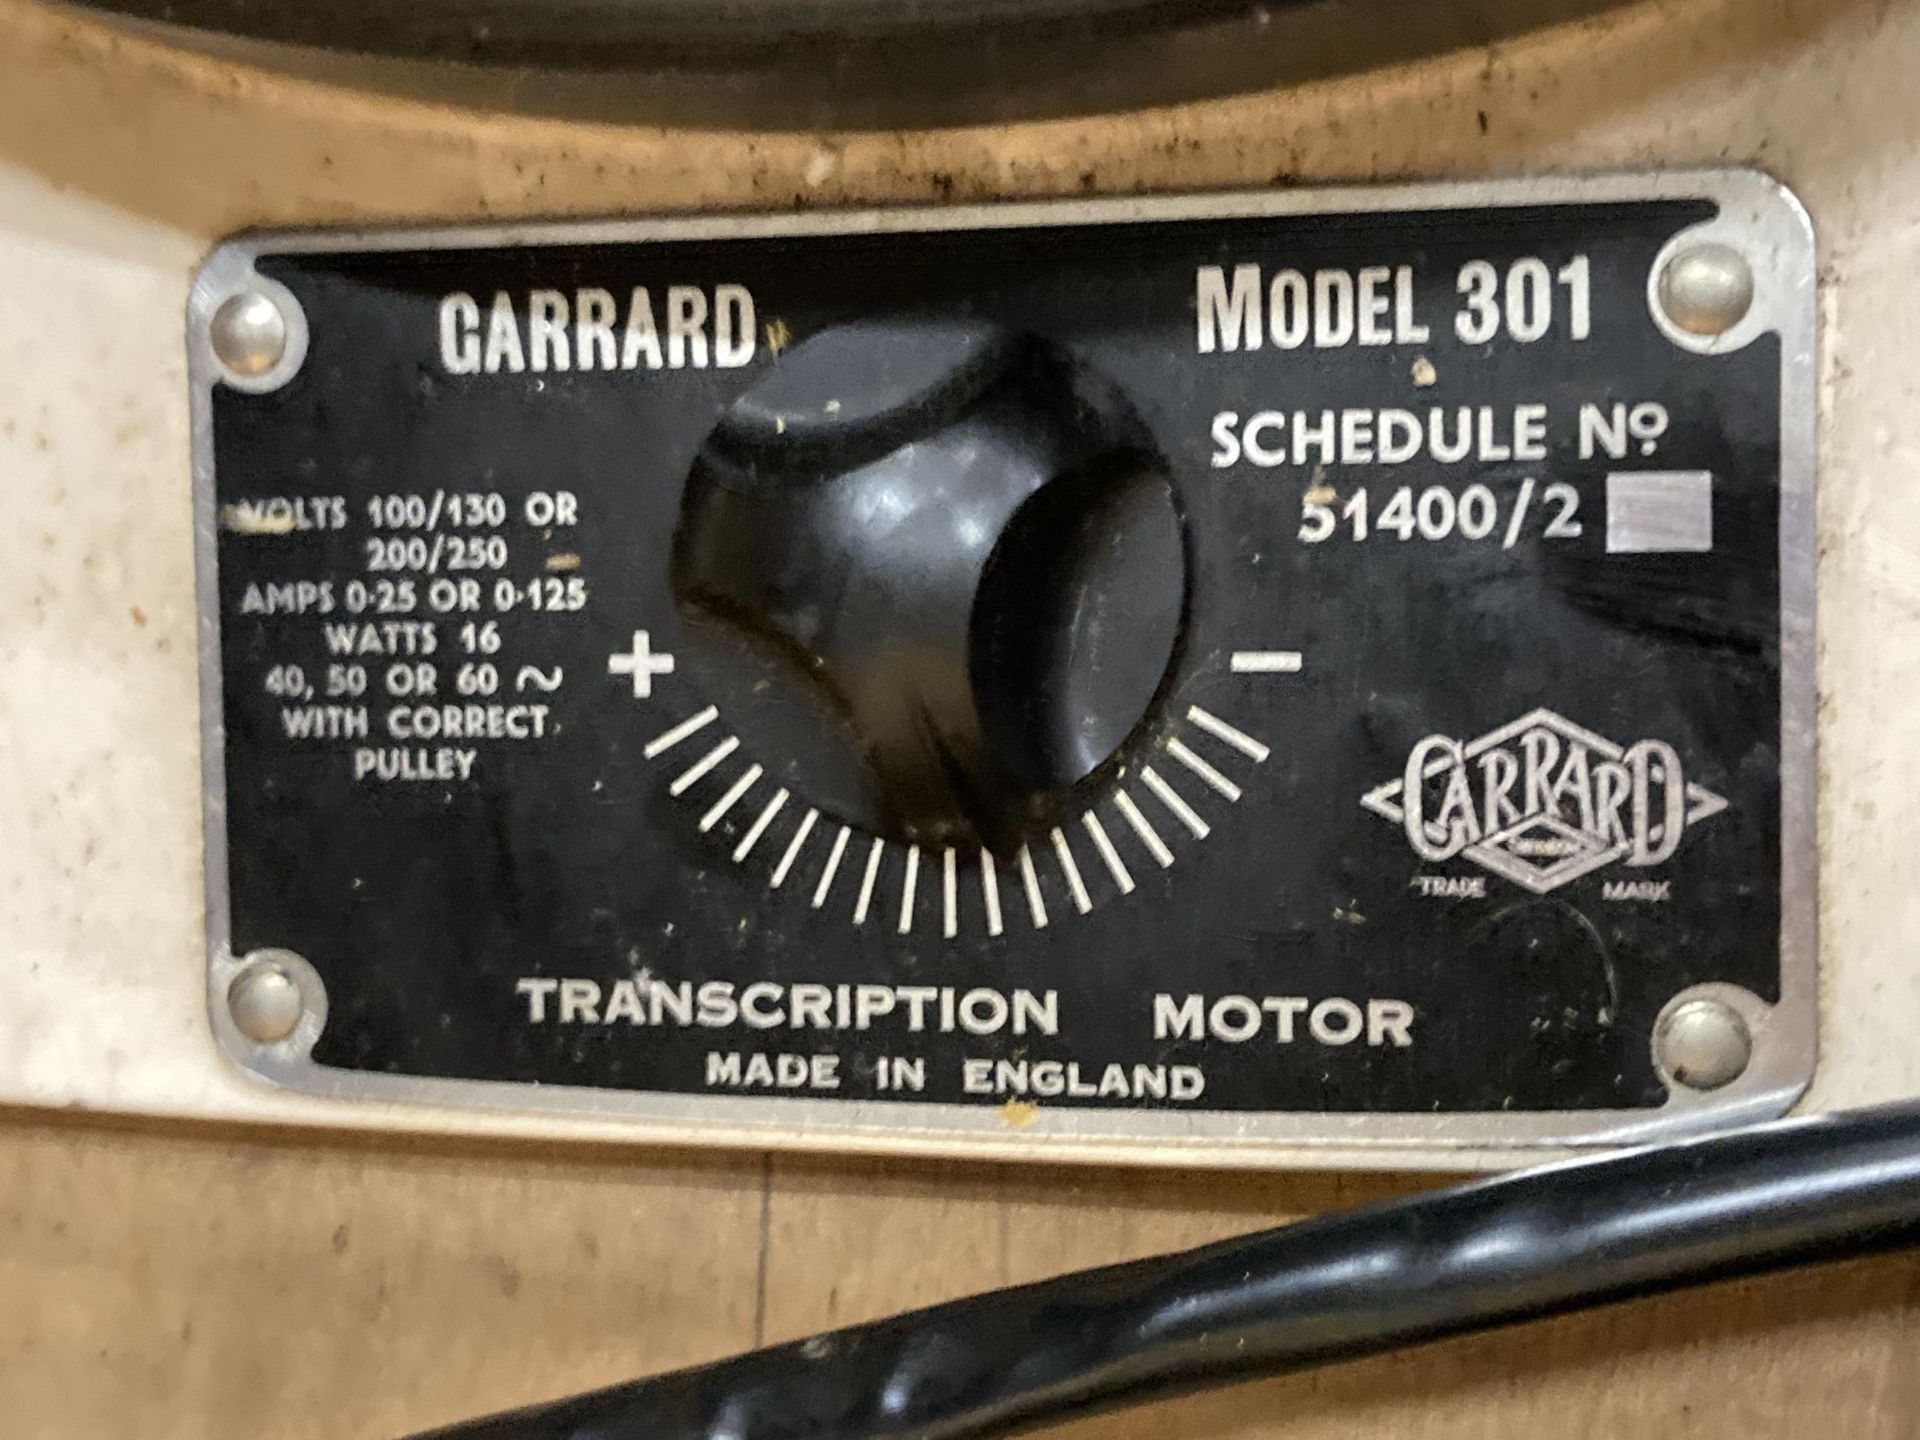 A GARRARD 301 TURNTABLE WITH INSTRUCTION, INSPECTION REPORT BOOK 3009 SME ARM, HEAD TYPE II IN - Image 11 of 14